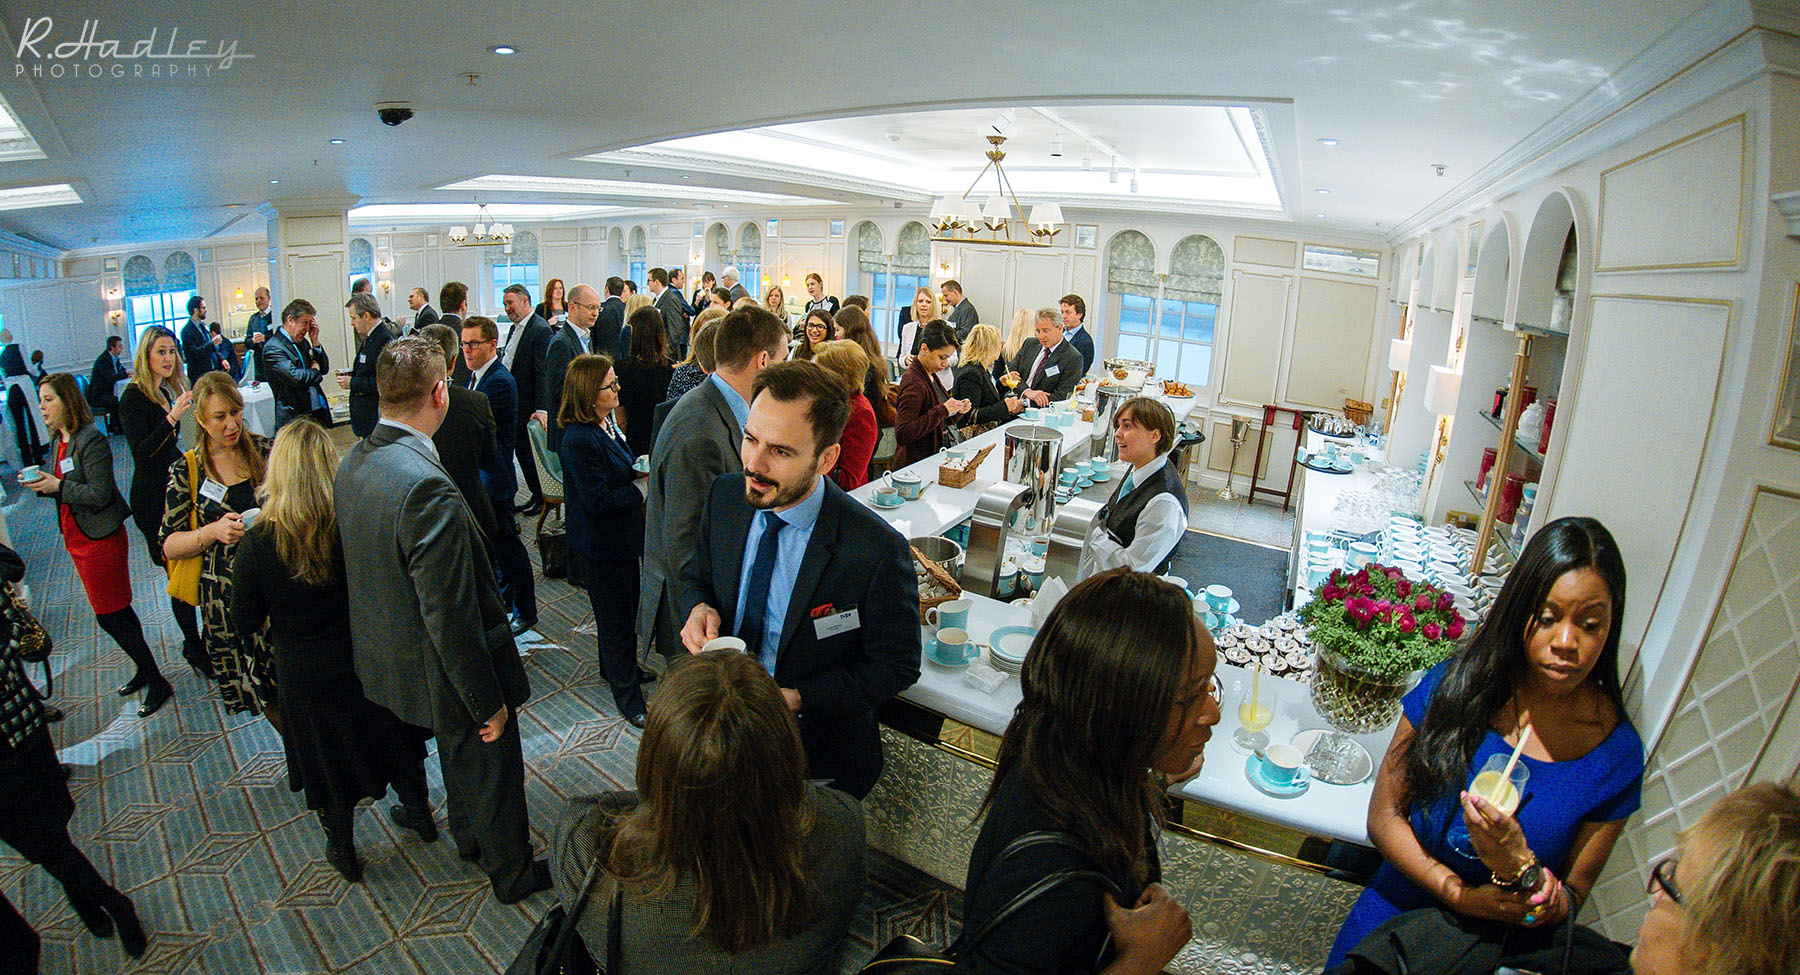 Corporate photography event at Fortnum & Mason, London